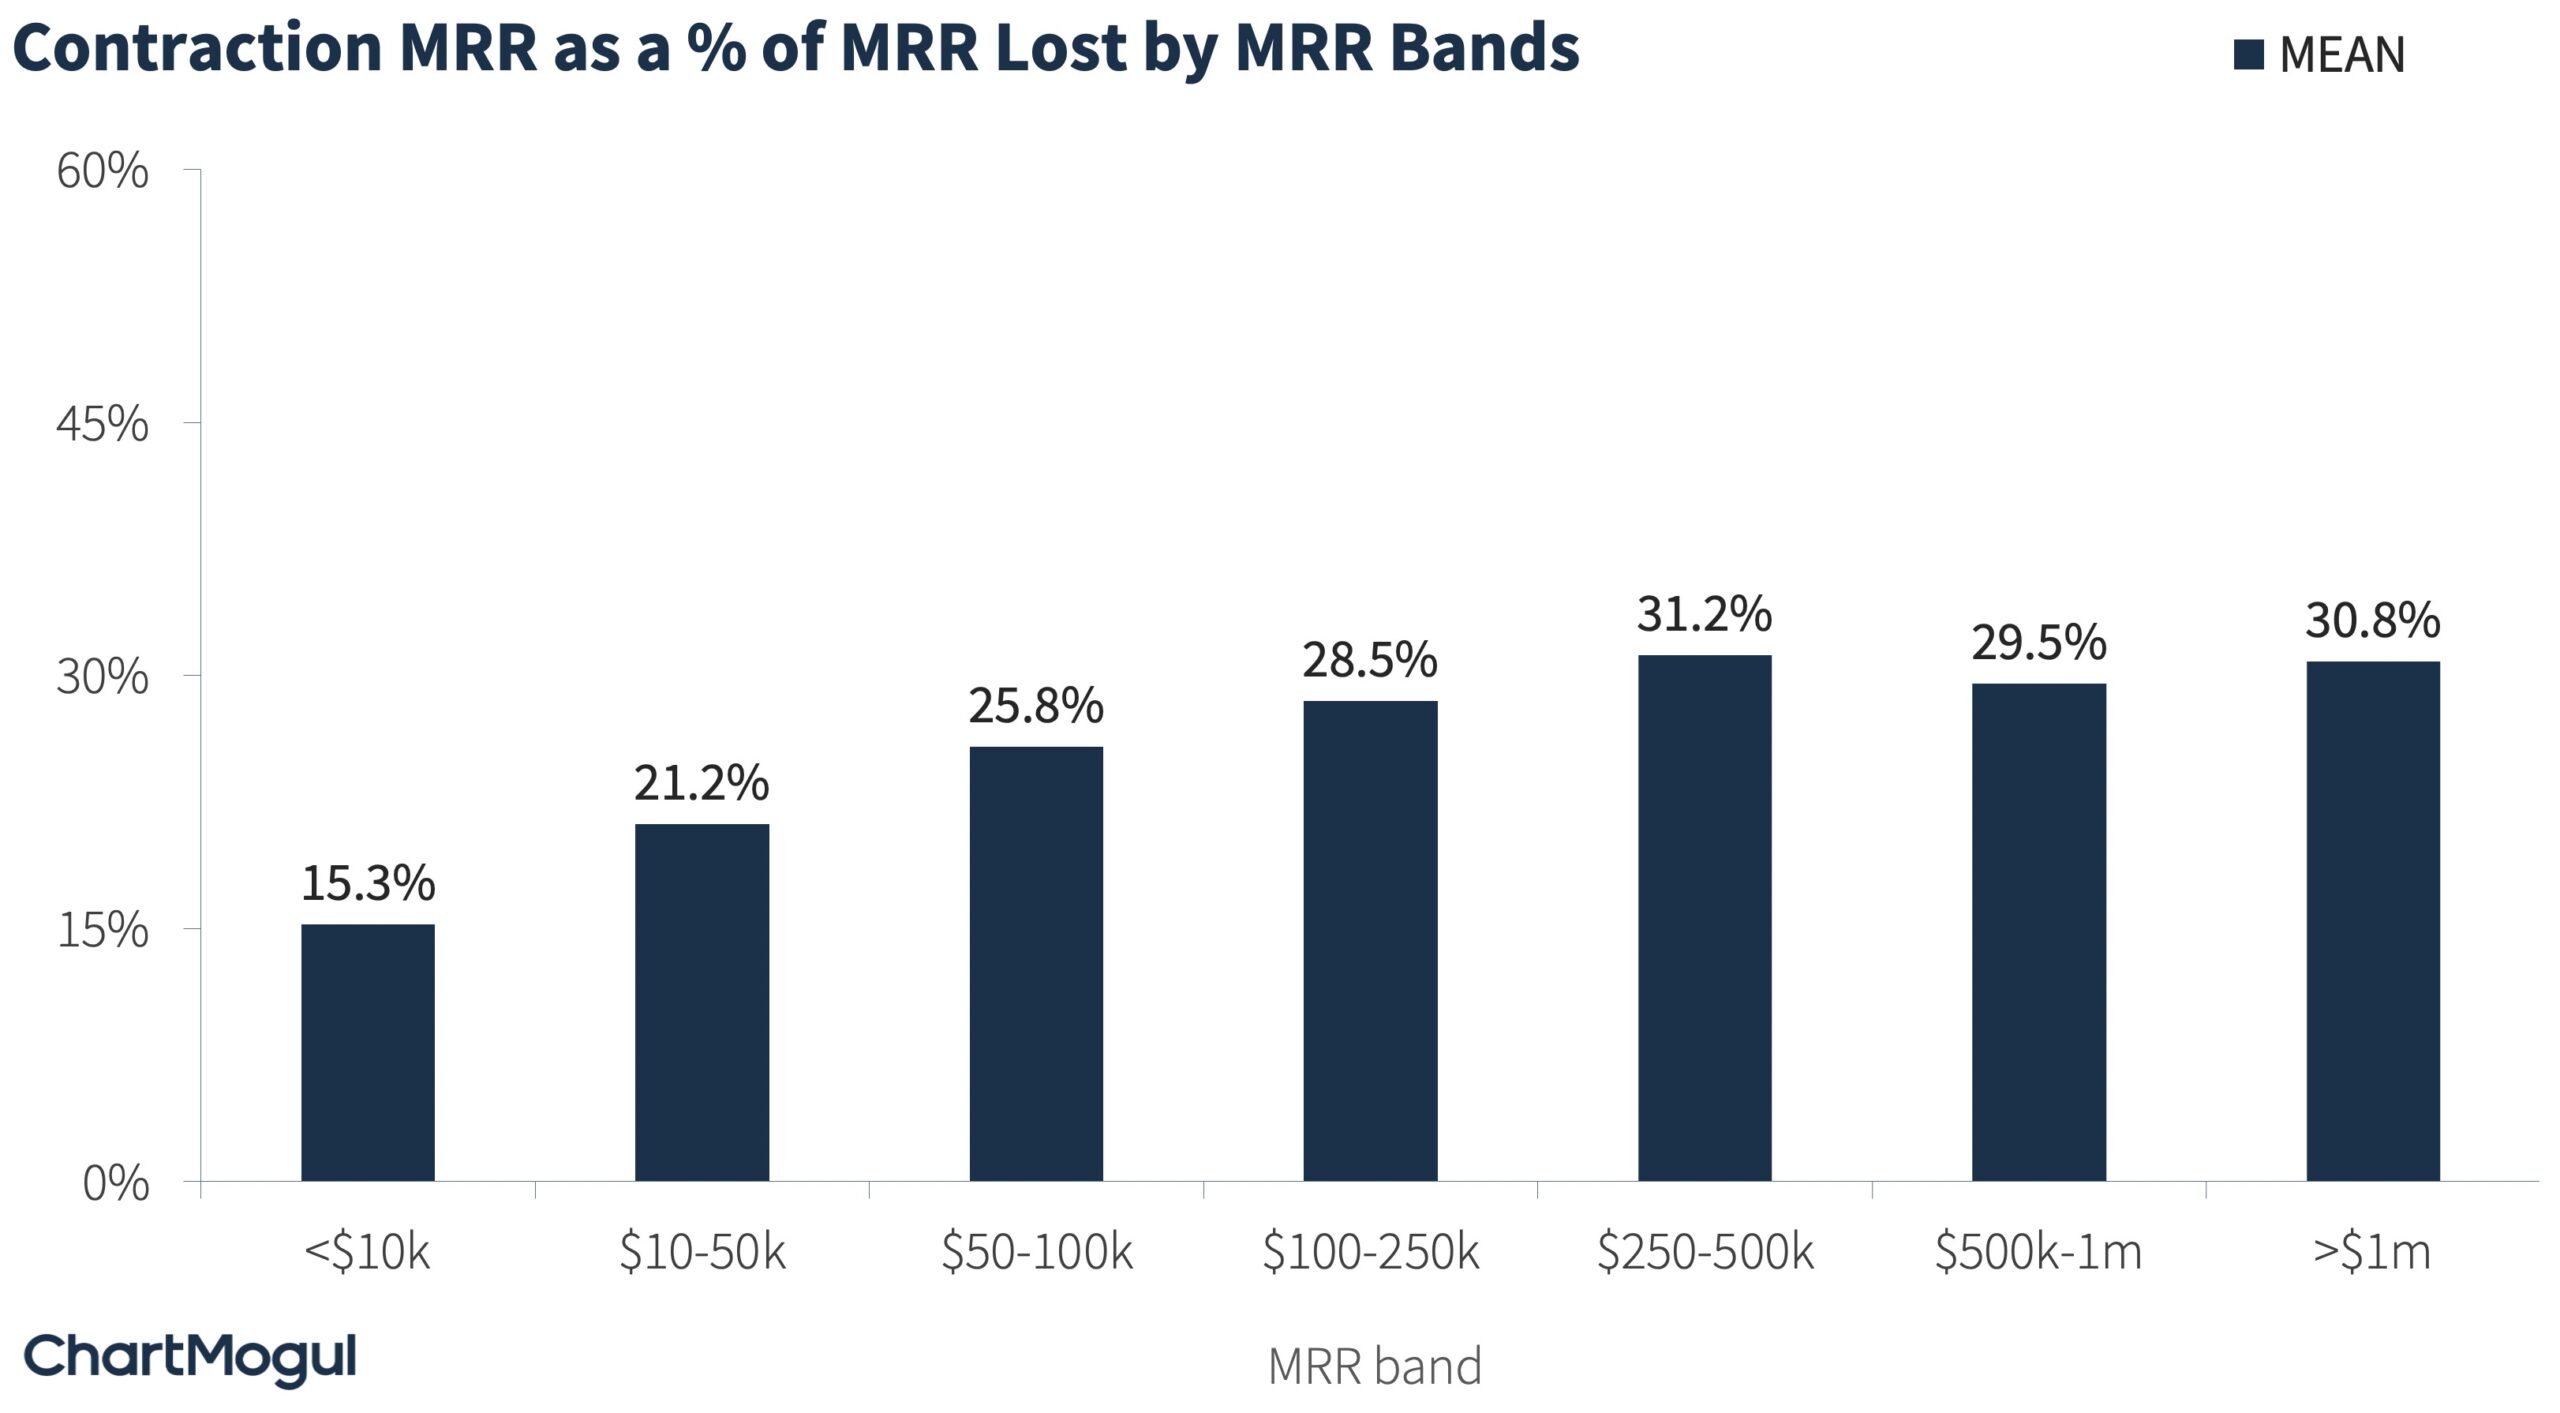 Contraction MRR as a % of MRR Lost